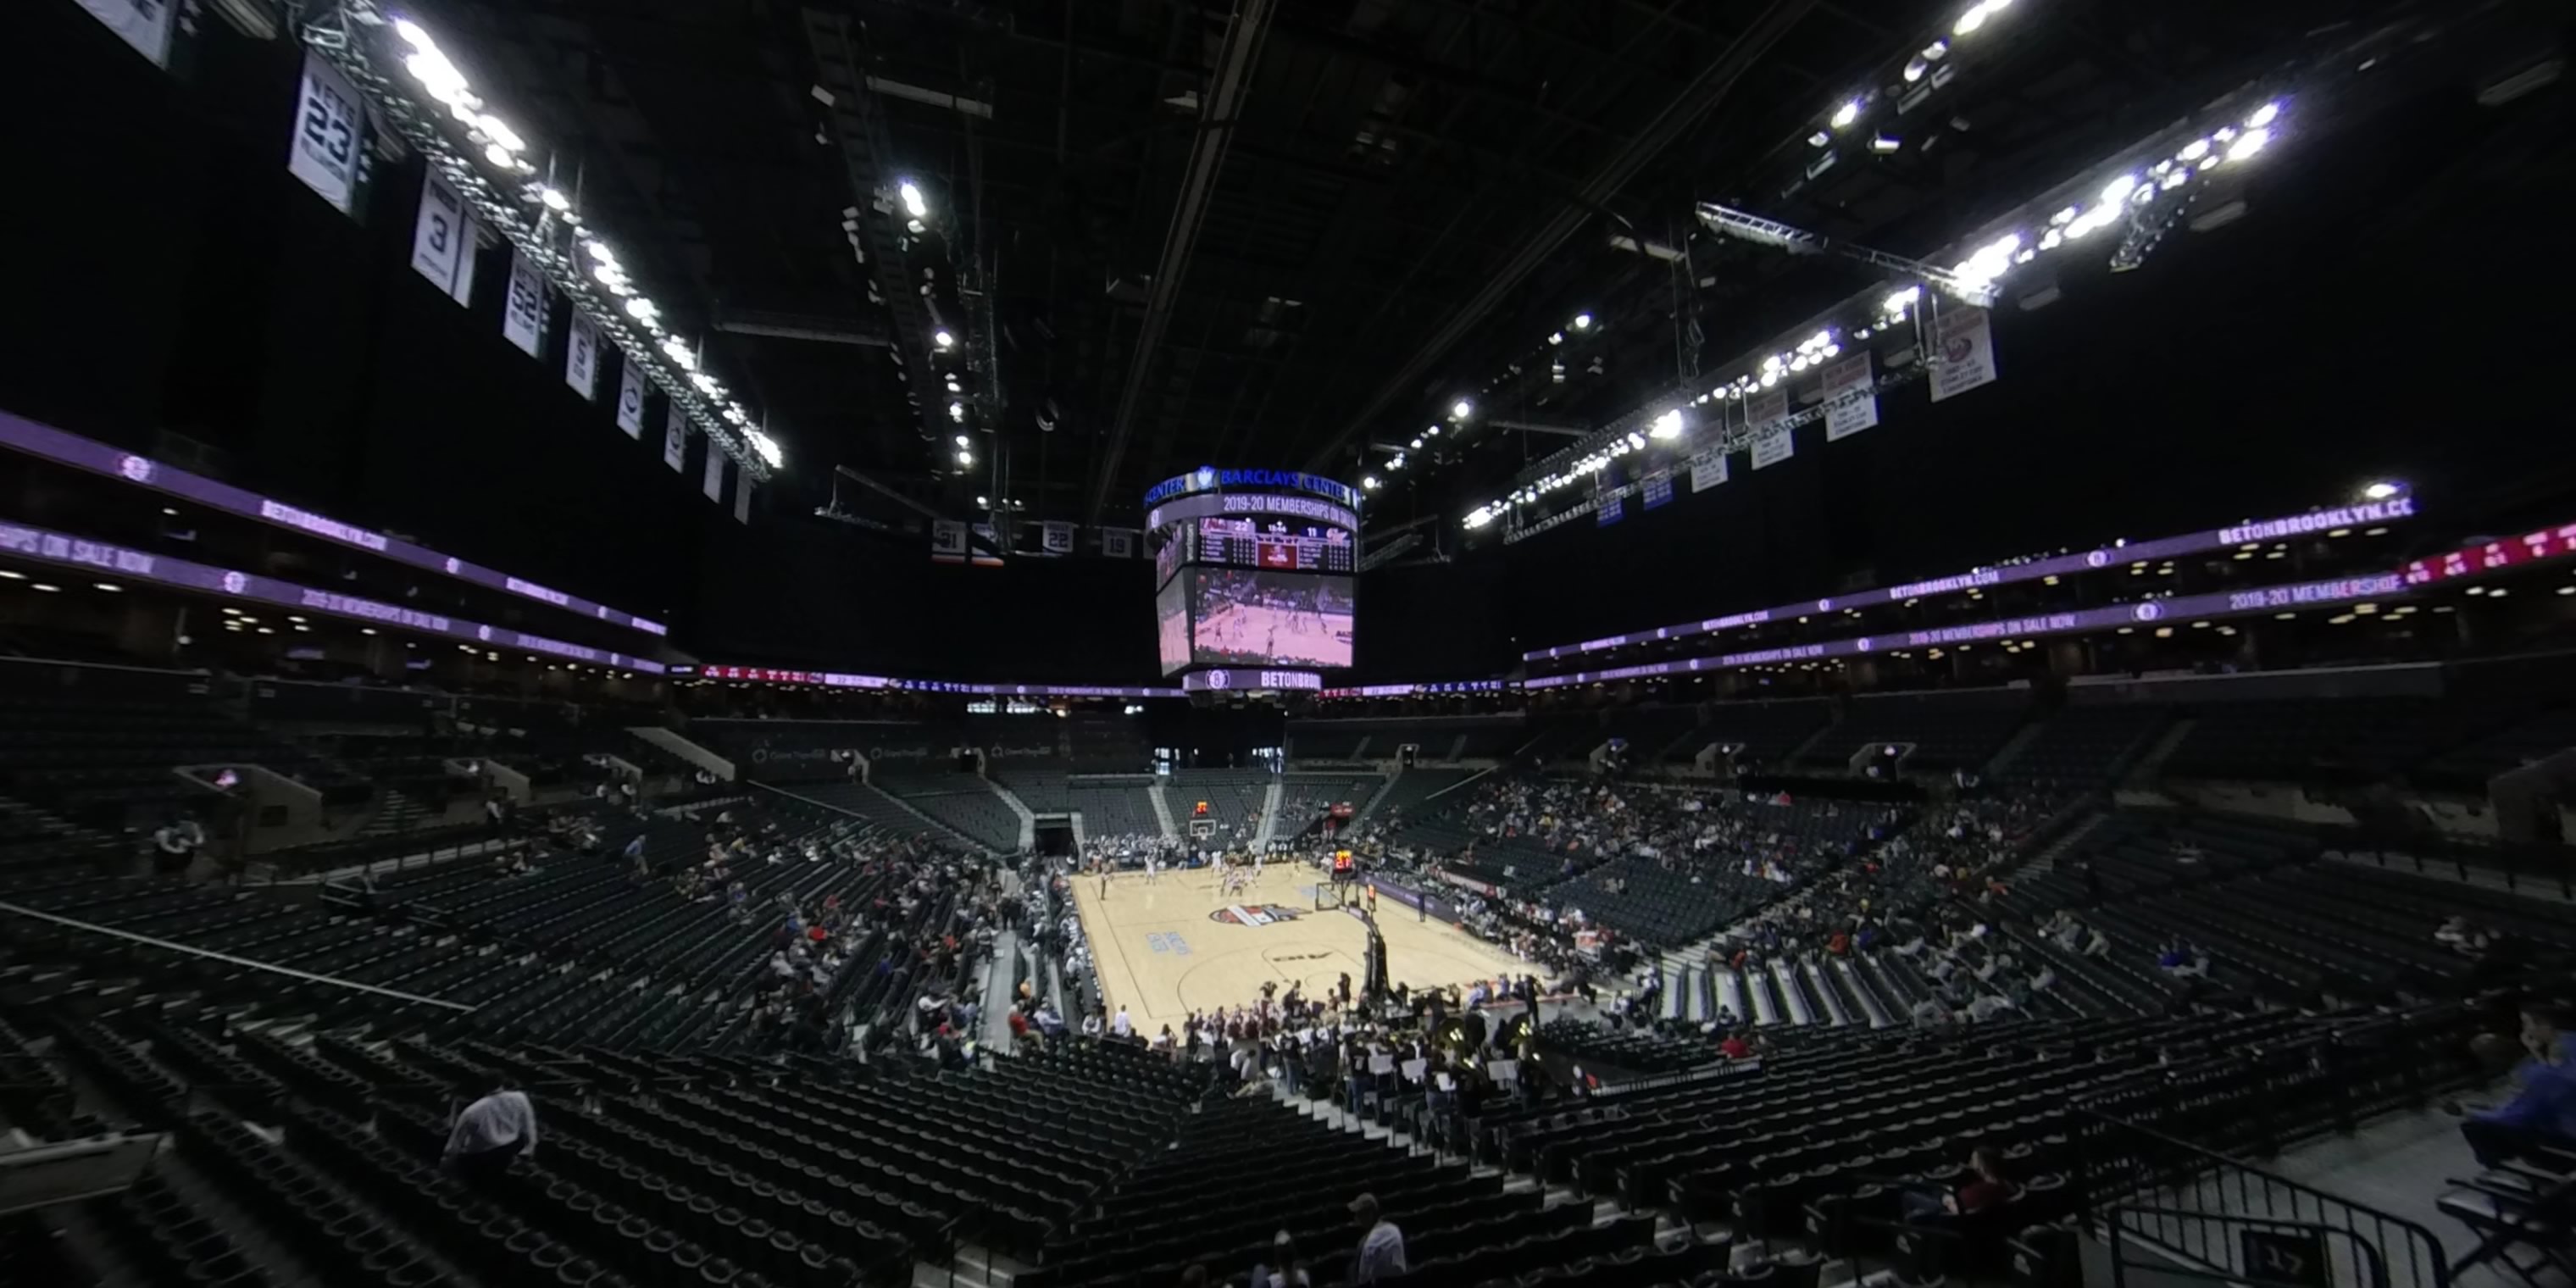 section 117 panoramic seat view  for basketball - barclays center